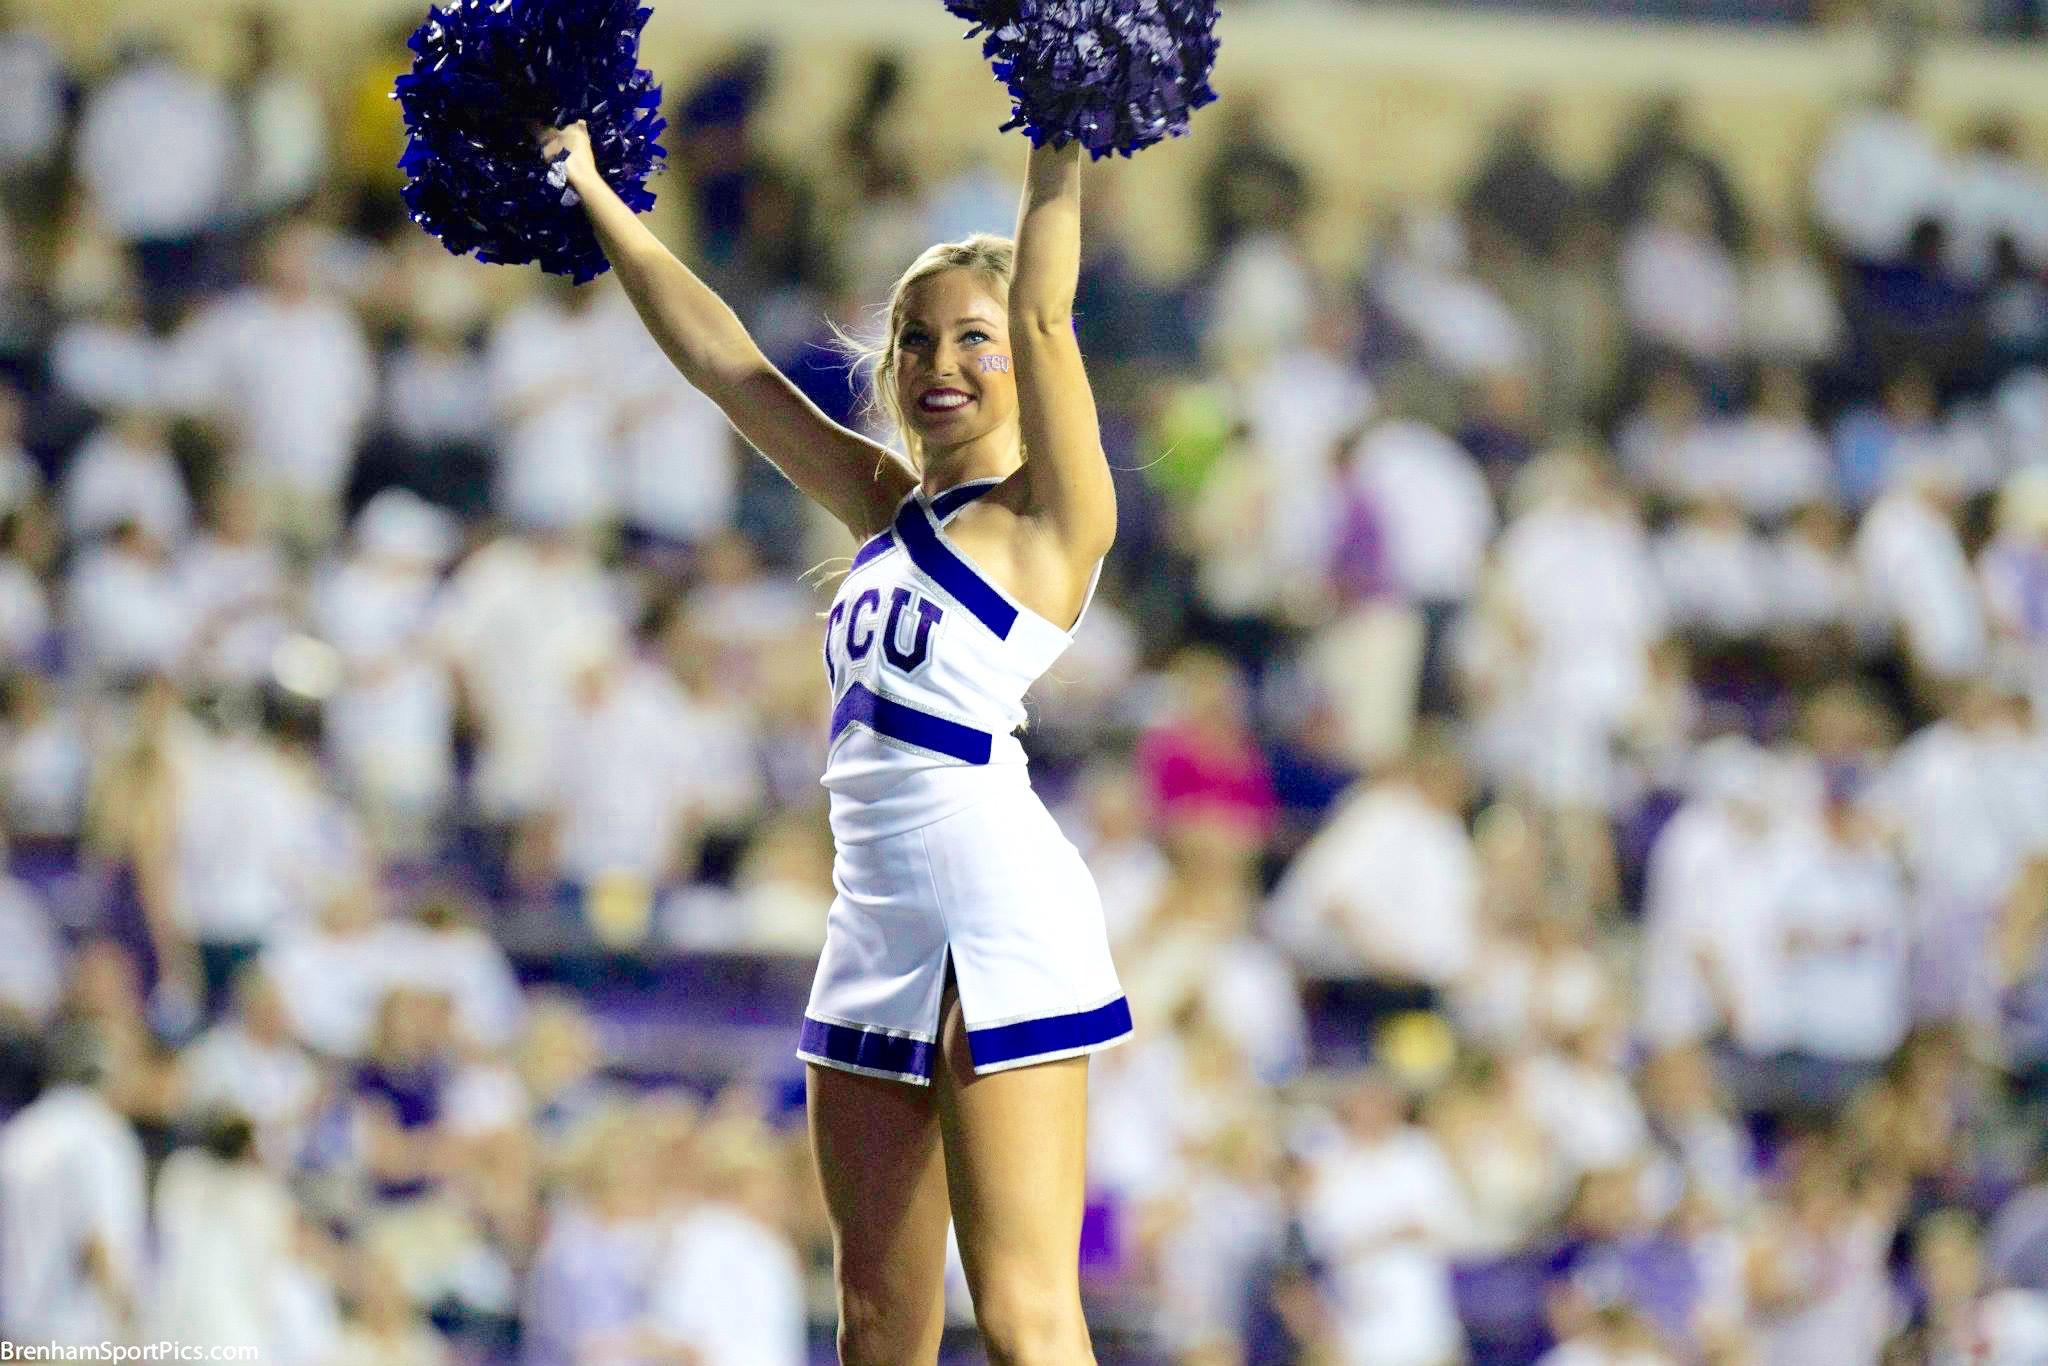 TCU+cheerleader+has+five+times+the+amount+of+Twitter+followers+as+senior+quarterback+Trevone+Boykin+and+double+the+amount+of+TCU+football+head+coach+Gary+Patterson+due+to+her+status+as+a+cheerlebrity.+